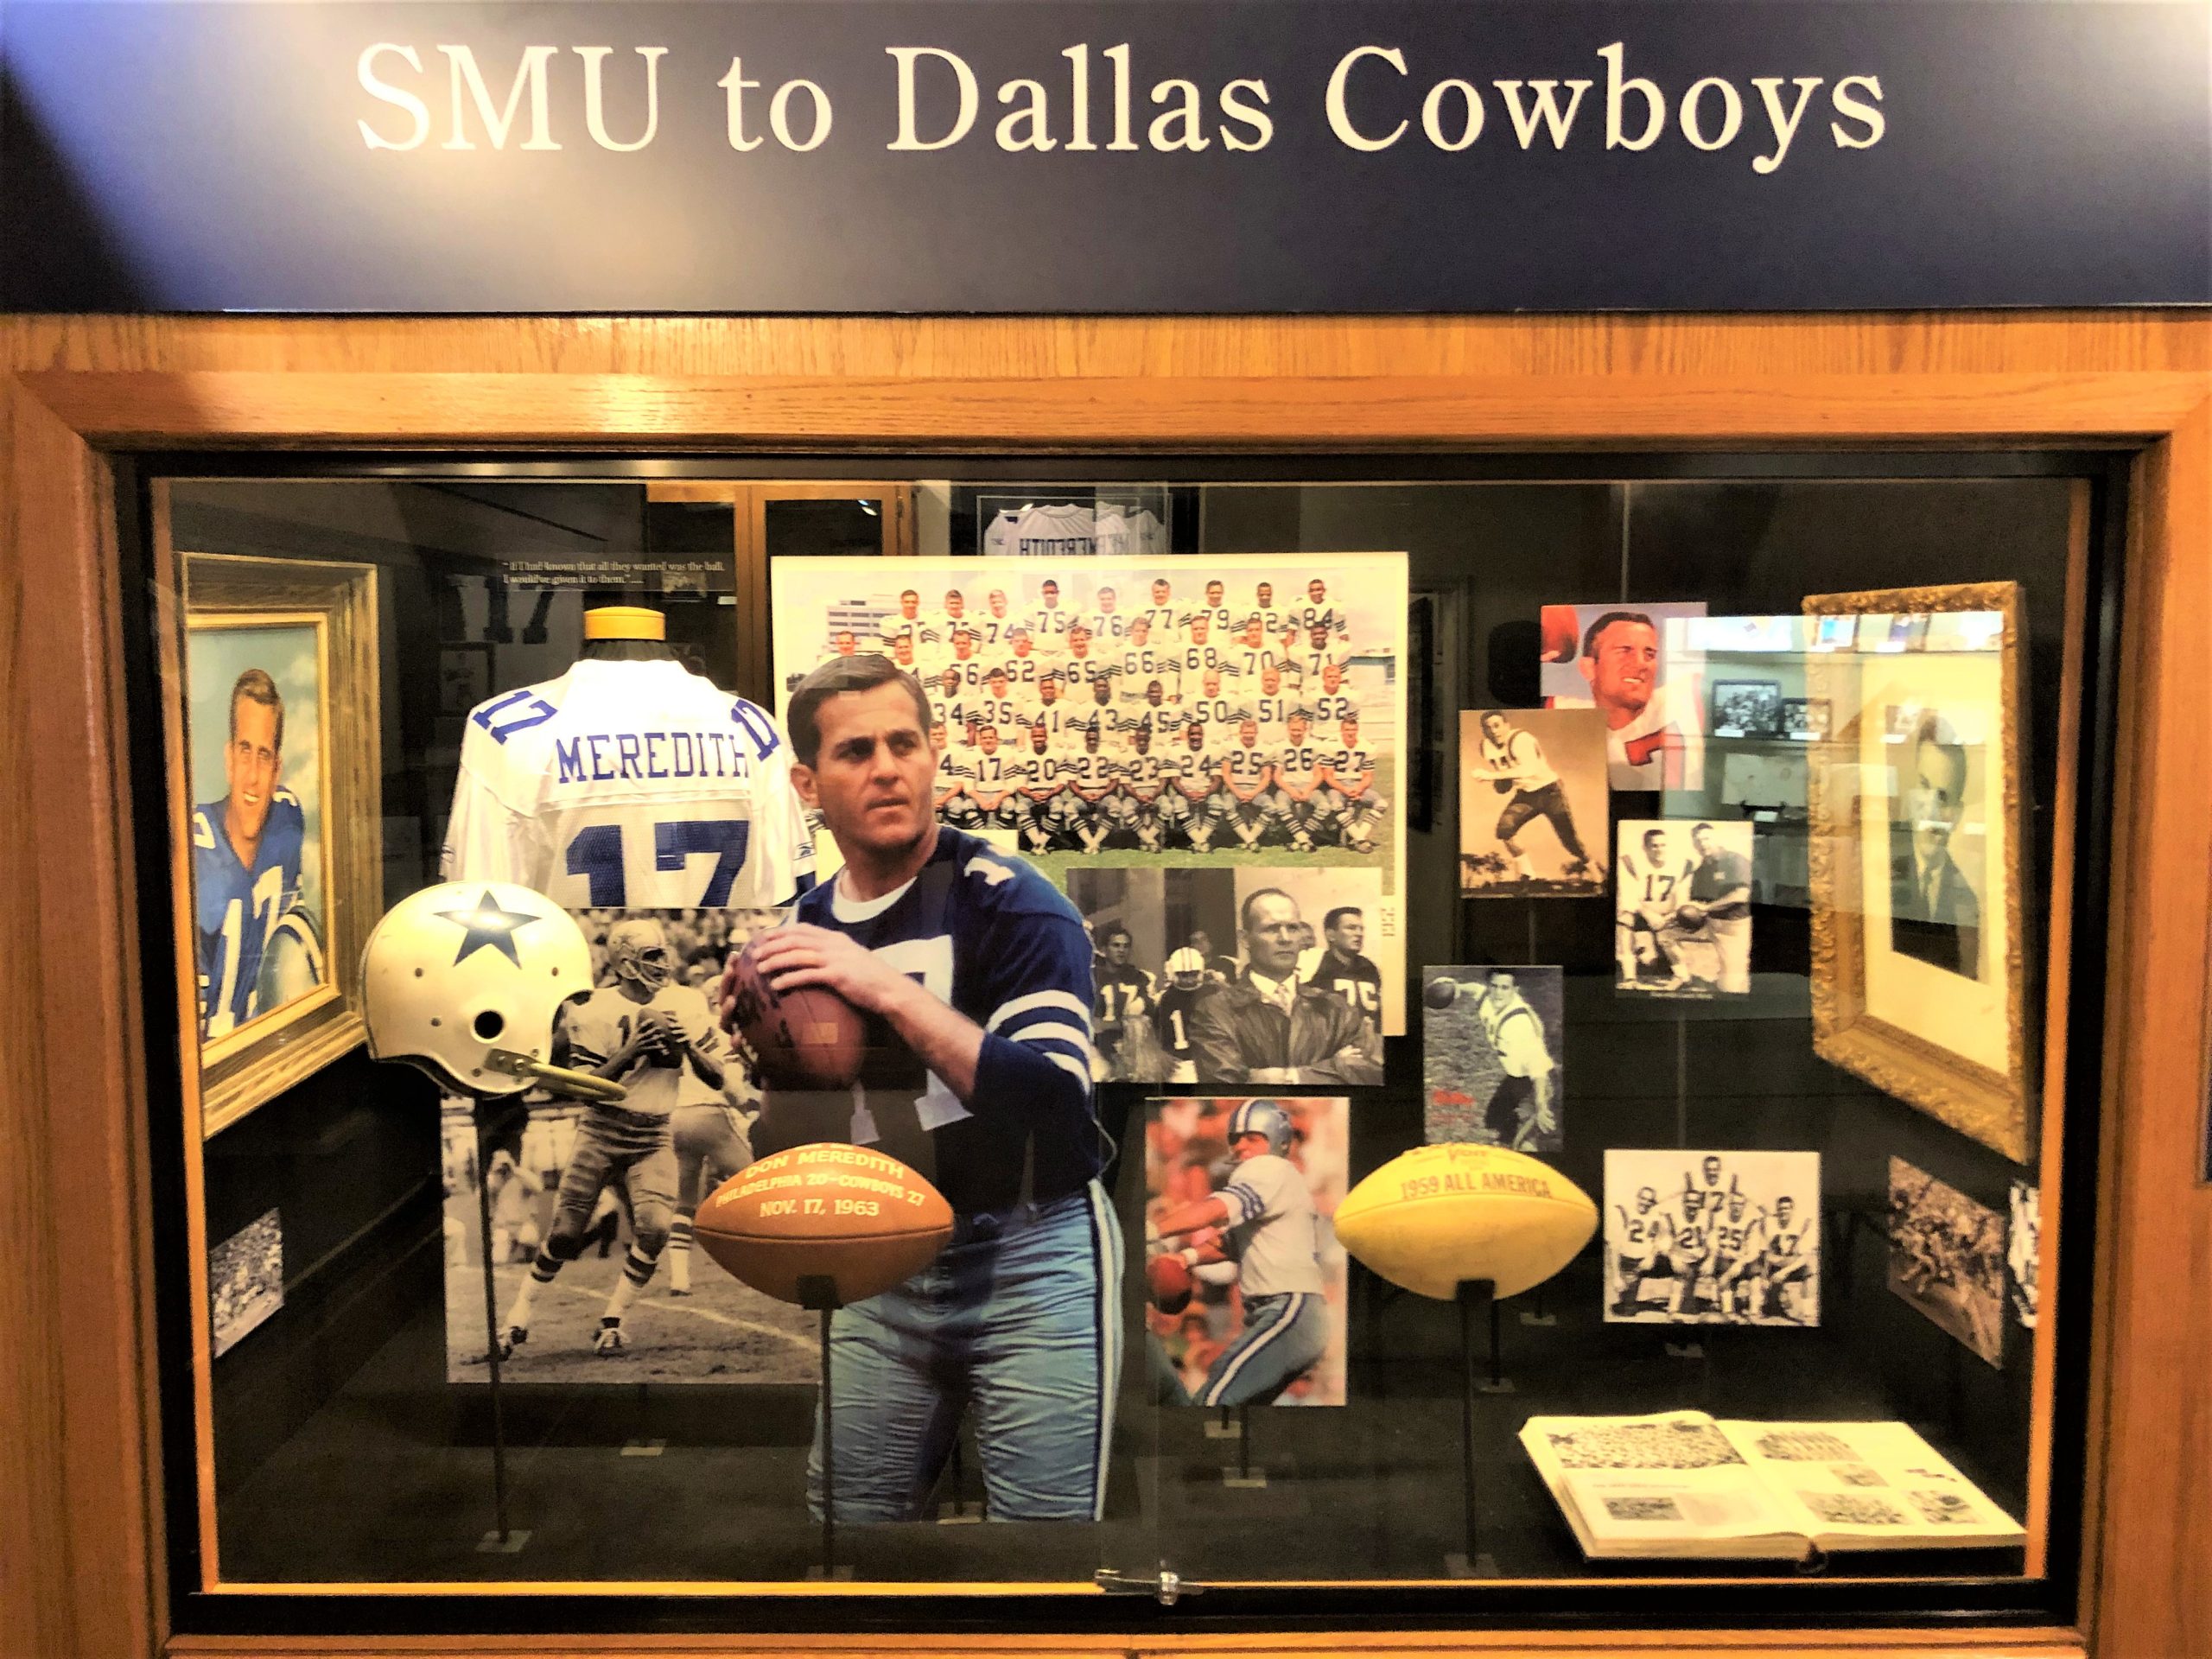 The display of Meredith's memorabilia from his time as a football player